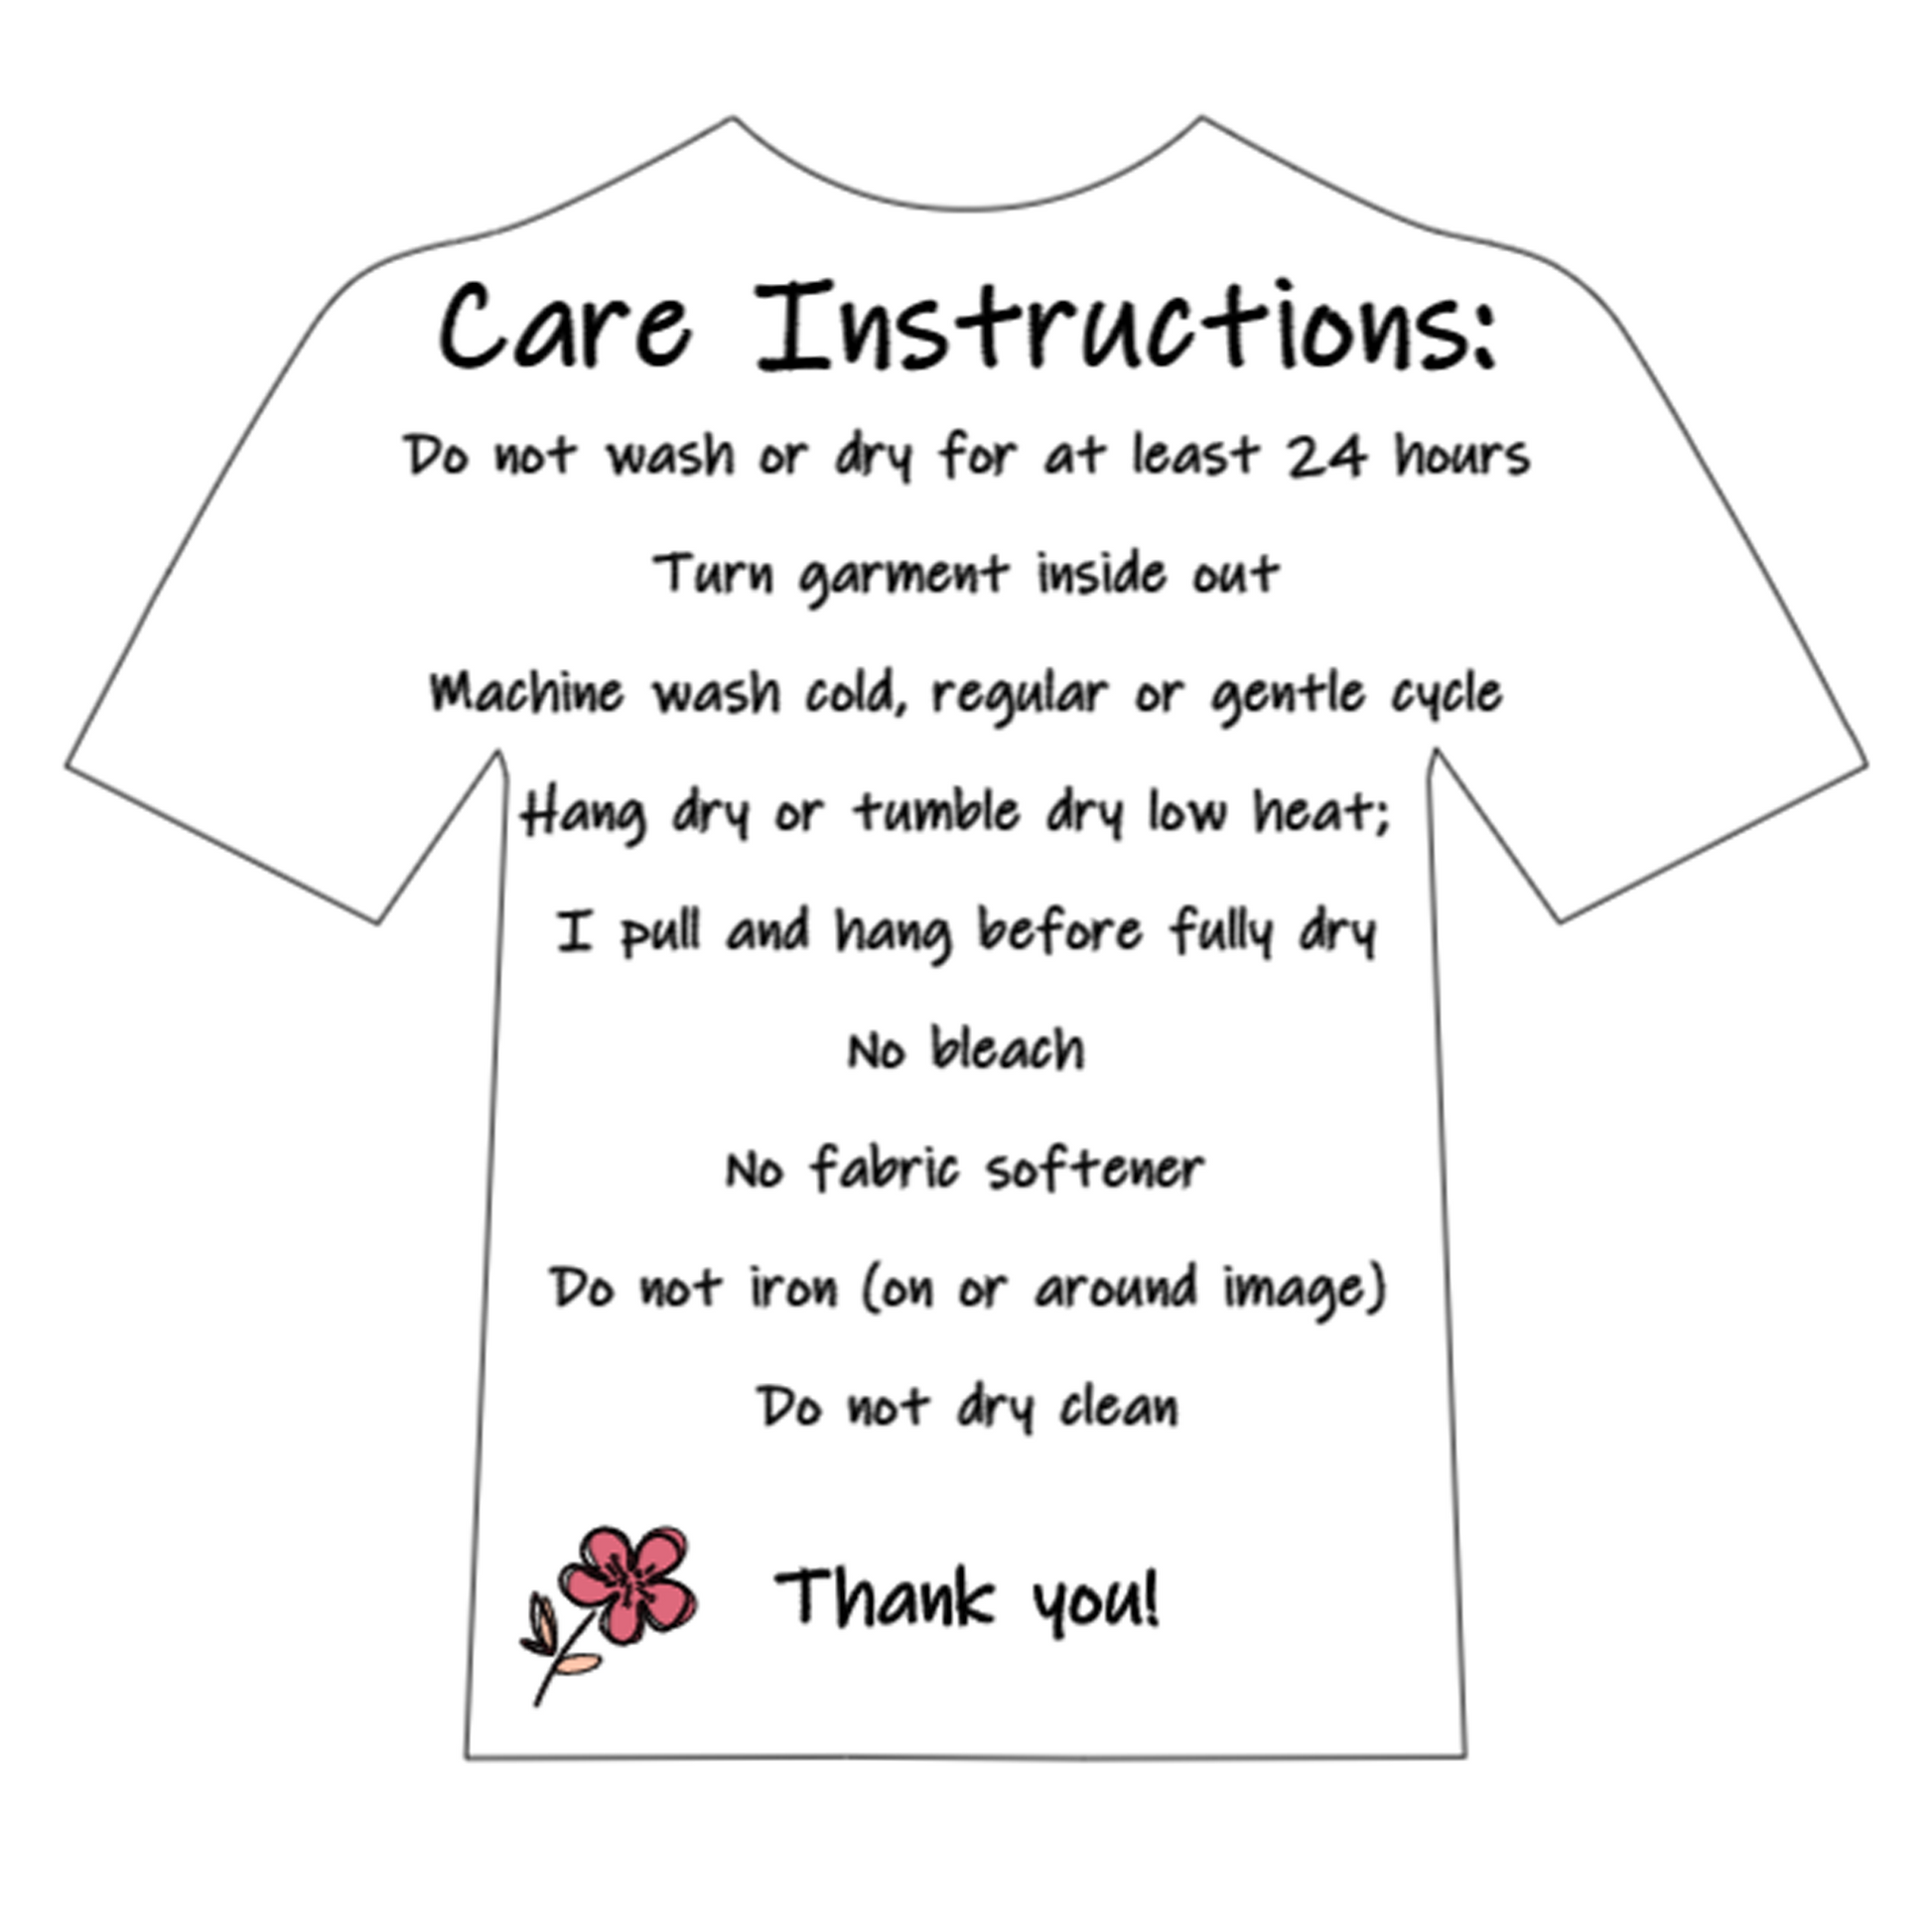 Care And Instructions